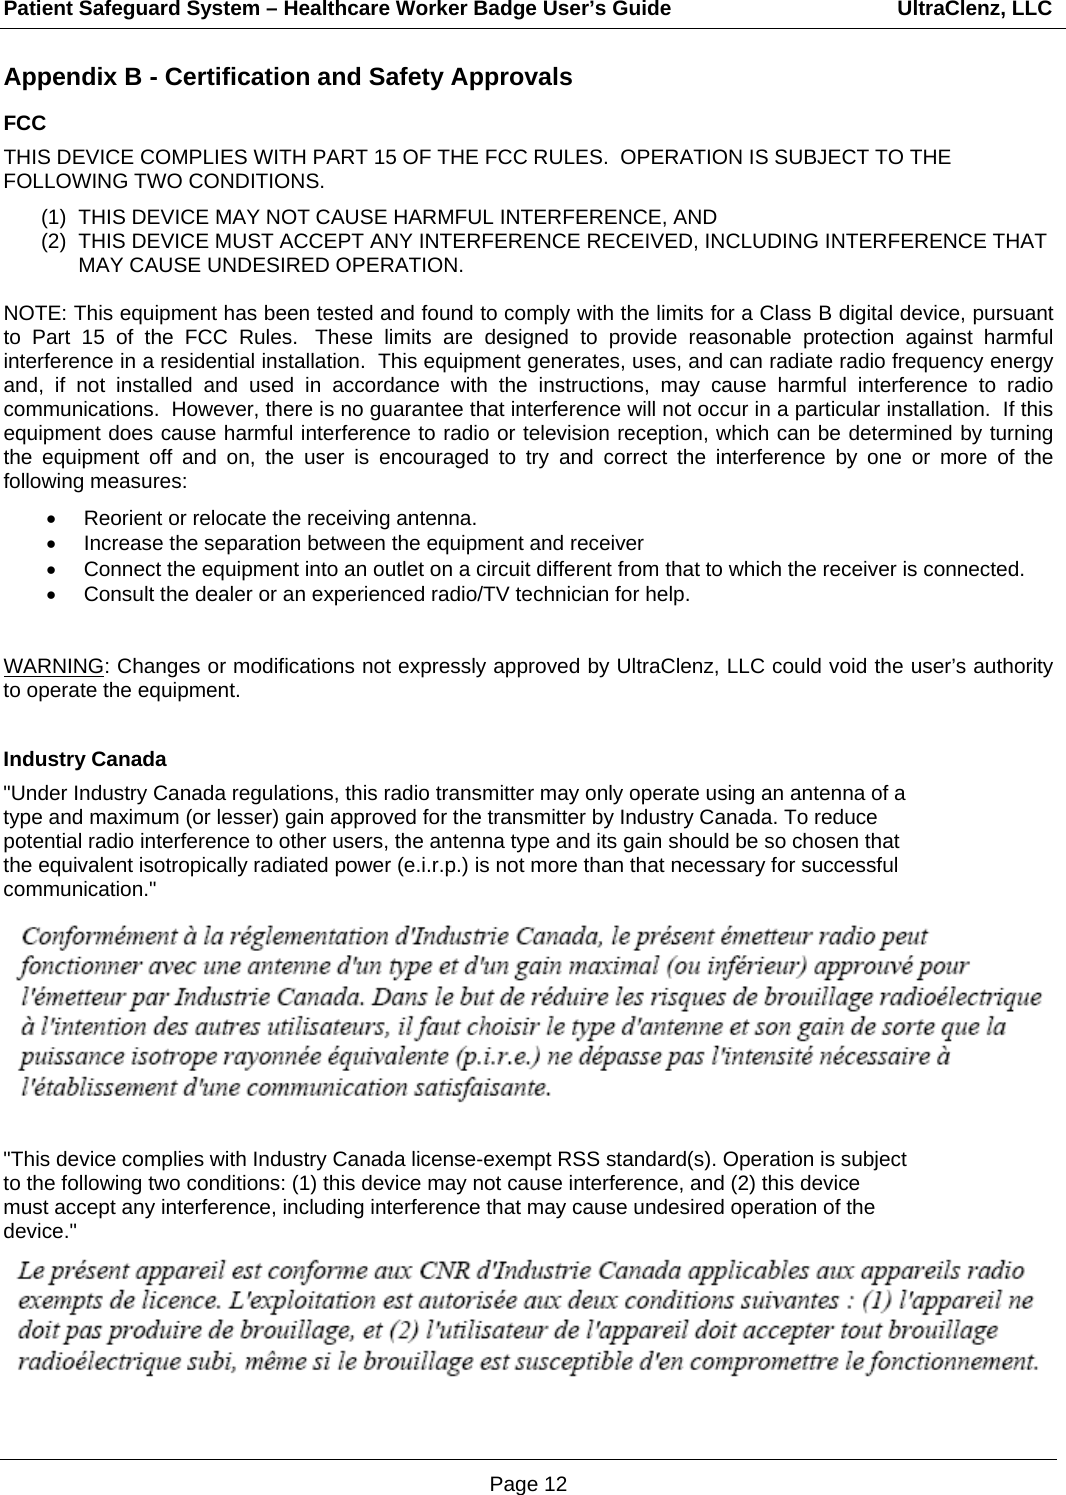 Patient Safeguard System – Healthcare Worker Badge User’s Guide                                       UltraClenz, LLC Page 12 Appendix B - Certification and Safety Approvals FCC THIS DEVICE COMPLIES WITH PART 15 OF THE FCC RULES.  OPERATION IS SUBJECT TO THE FOLLOWING TWO CONDITIONS.  (1)  THIS DEVICE MAY NOT CAUSE HARMFUL INTERFERENCE, AND (2)  THIS DEVICE MUST ACCEPT ANY INTERFERENCE RECEIVED, INCLUDING INTERFERENCE THAT MAY CAUSE UNDESIRED OPERATION.  NOTE: This equipment has been tested and found to comply with the limits for a Class B digital device, pursuant to Part 15 of the FCC Rules.  These limits are designed to provide reasonable protection against harmful interference in a residential installation.  This equipment generates, uses, and can radiate radio frequency energy and, if not installed and used in accordance with the instructions, may cause harmful interference to radio communications.  However, there is no guarantee that interference will not occur in a particular installation.  If this equipment does cause harmful interference to radio or television reception, which can be determined by turning the equipment off and on, the user is encouraged to try and correct the interference by one or more of the following measures:  •  Reorient or relocate the receiving antenna. •  Increase the separation between the equipment and receiver •  Connect the equipment into an outlet on a circuit different from that to which the receiver is connected. •  Consult the dealer or an experienced radio/TV technician for help.   WARNING: Changes or modifications not expressly approved by UltraClenz, LLC could void the user’s authority to operate the equipment.  Industry Canada &quot;Under Industry Canada regulations, this radio transmitter may only operate using an antenna of a type and maximum (or lesser) gain approved for the transmitter by Industry Canada. To reduce potential radio interference to other users, the antenna type and its gain should be so chosen that the equivalent isotropically radiated power (e.i.r.p.) is not more than that necessary for successful communication.&quot;  &quot;This device complies with Industry Canada license-exempt RSS standard(s). Operation is subject to the following two conditions: (1) this device may not cause interference, and (2) this device must accept any interference, including interference that may cause undesired operation of the device.&quot;    